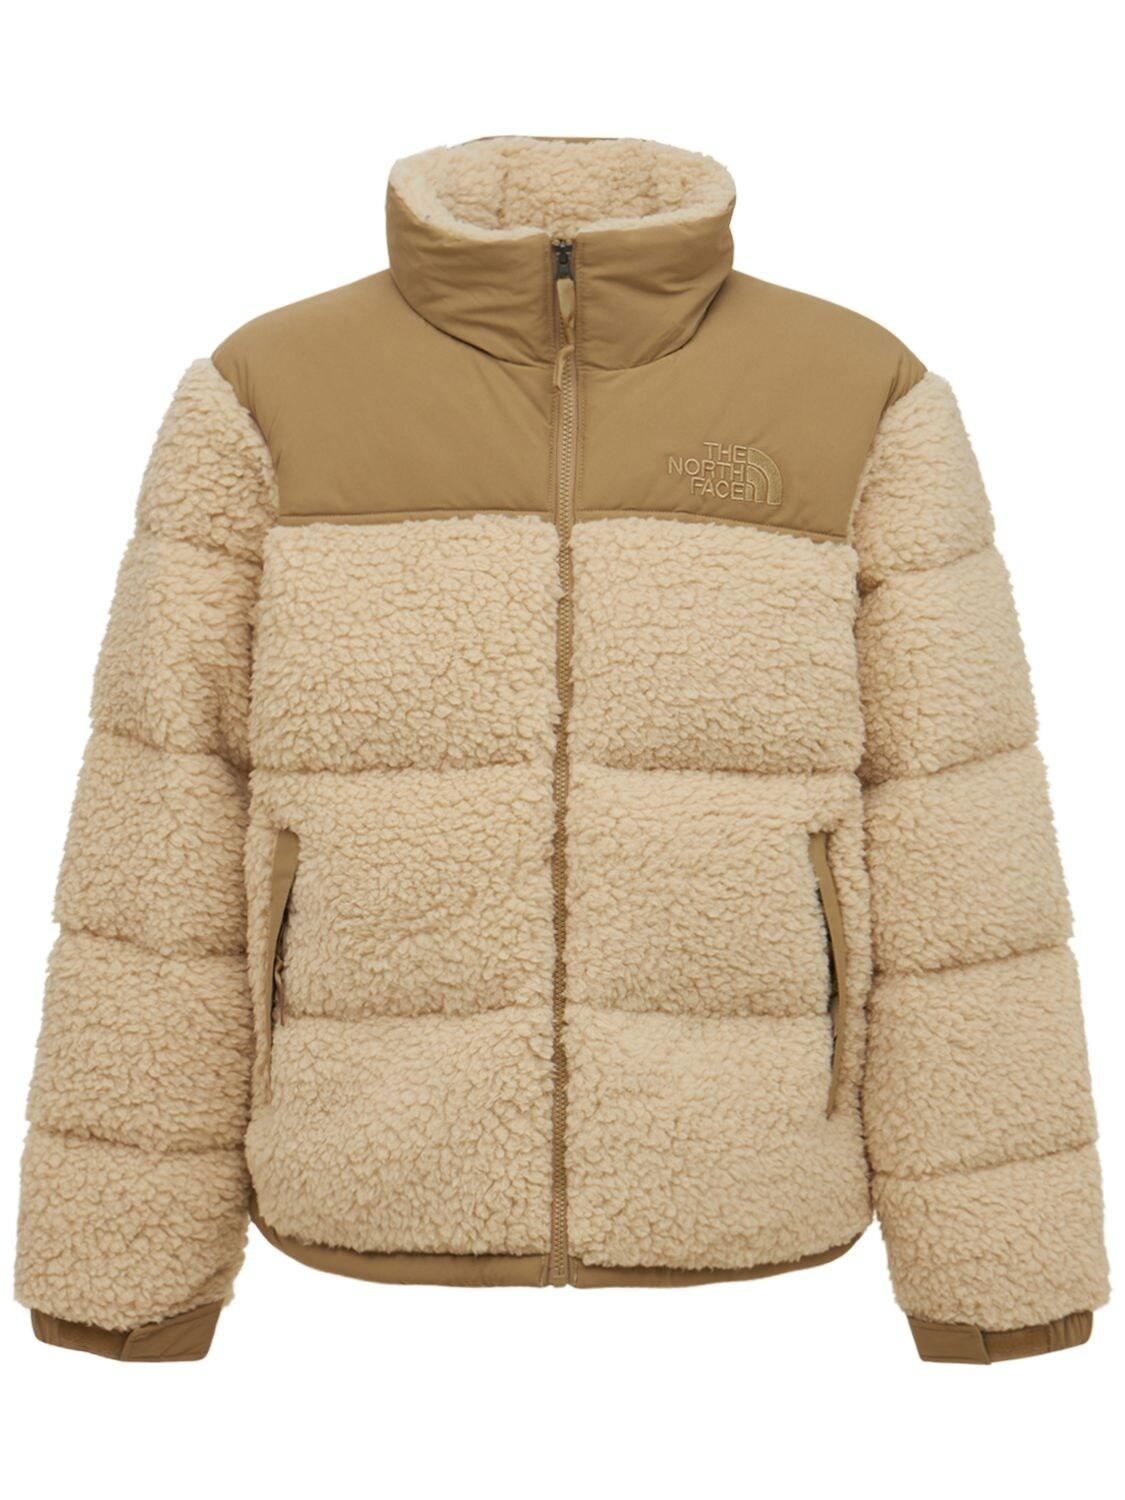 The North Face Sherpa Nuptse Down Jacket in Natural for Men - Lyst